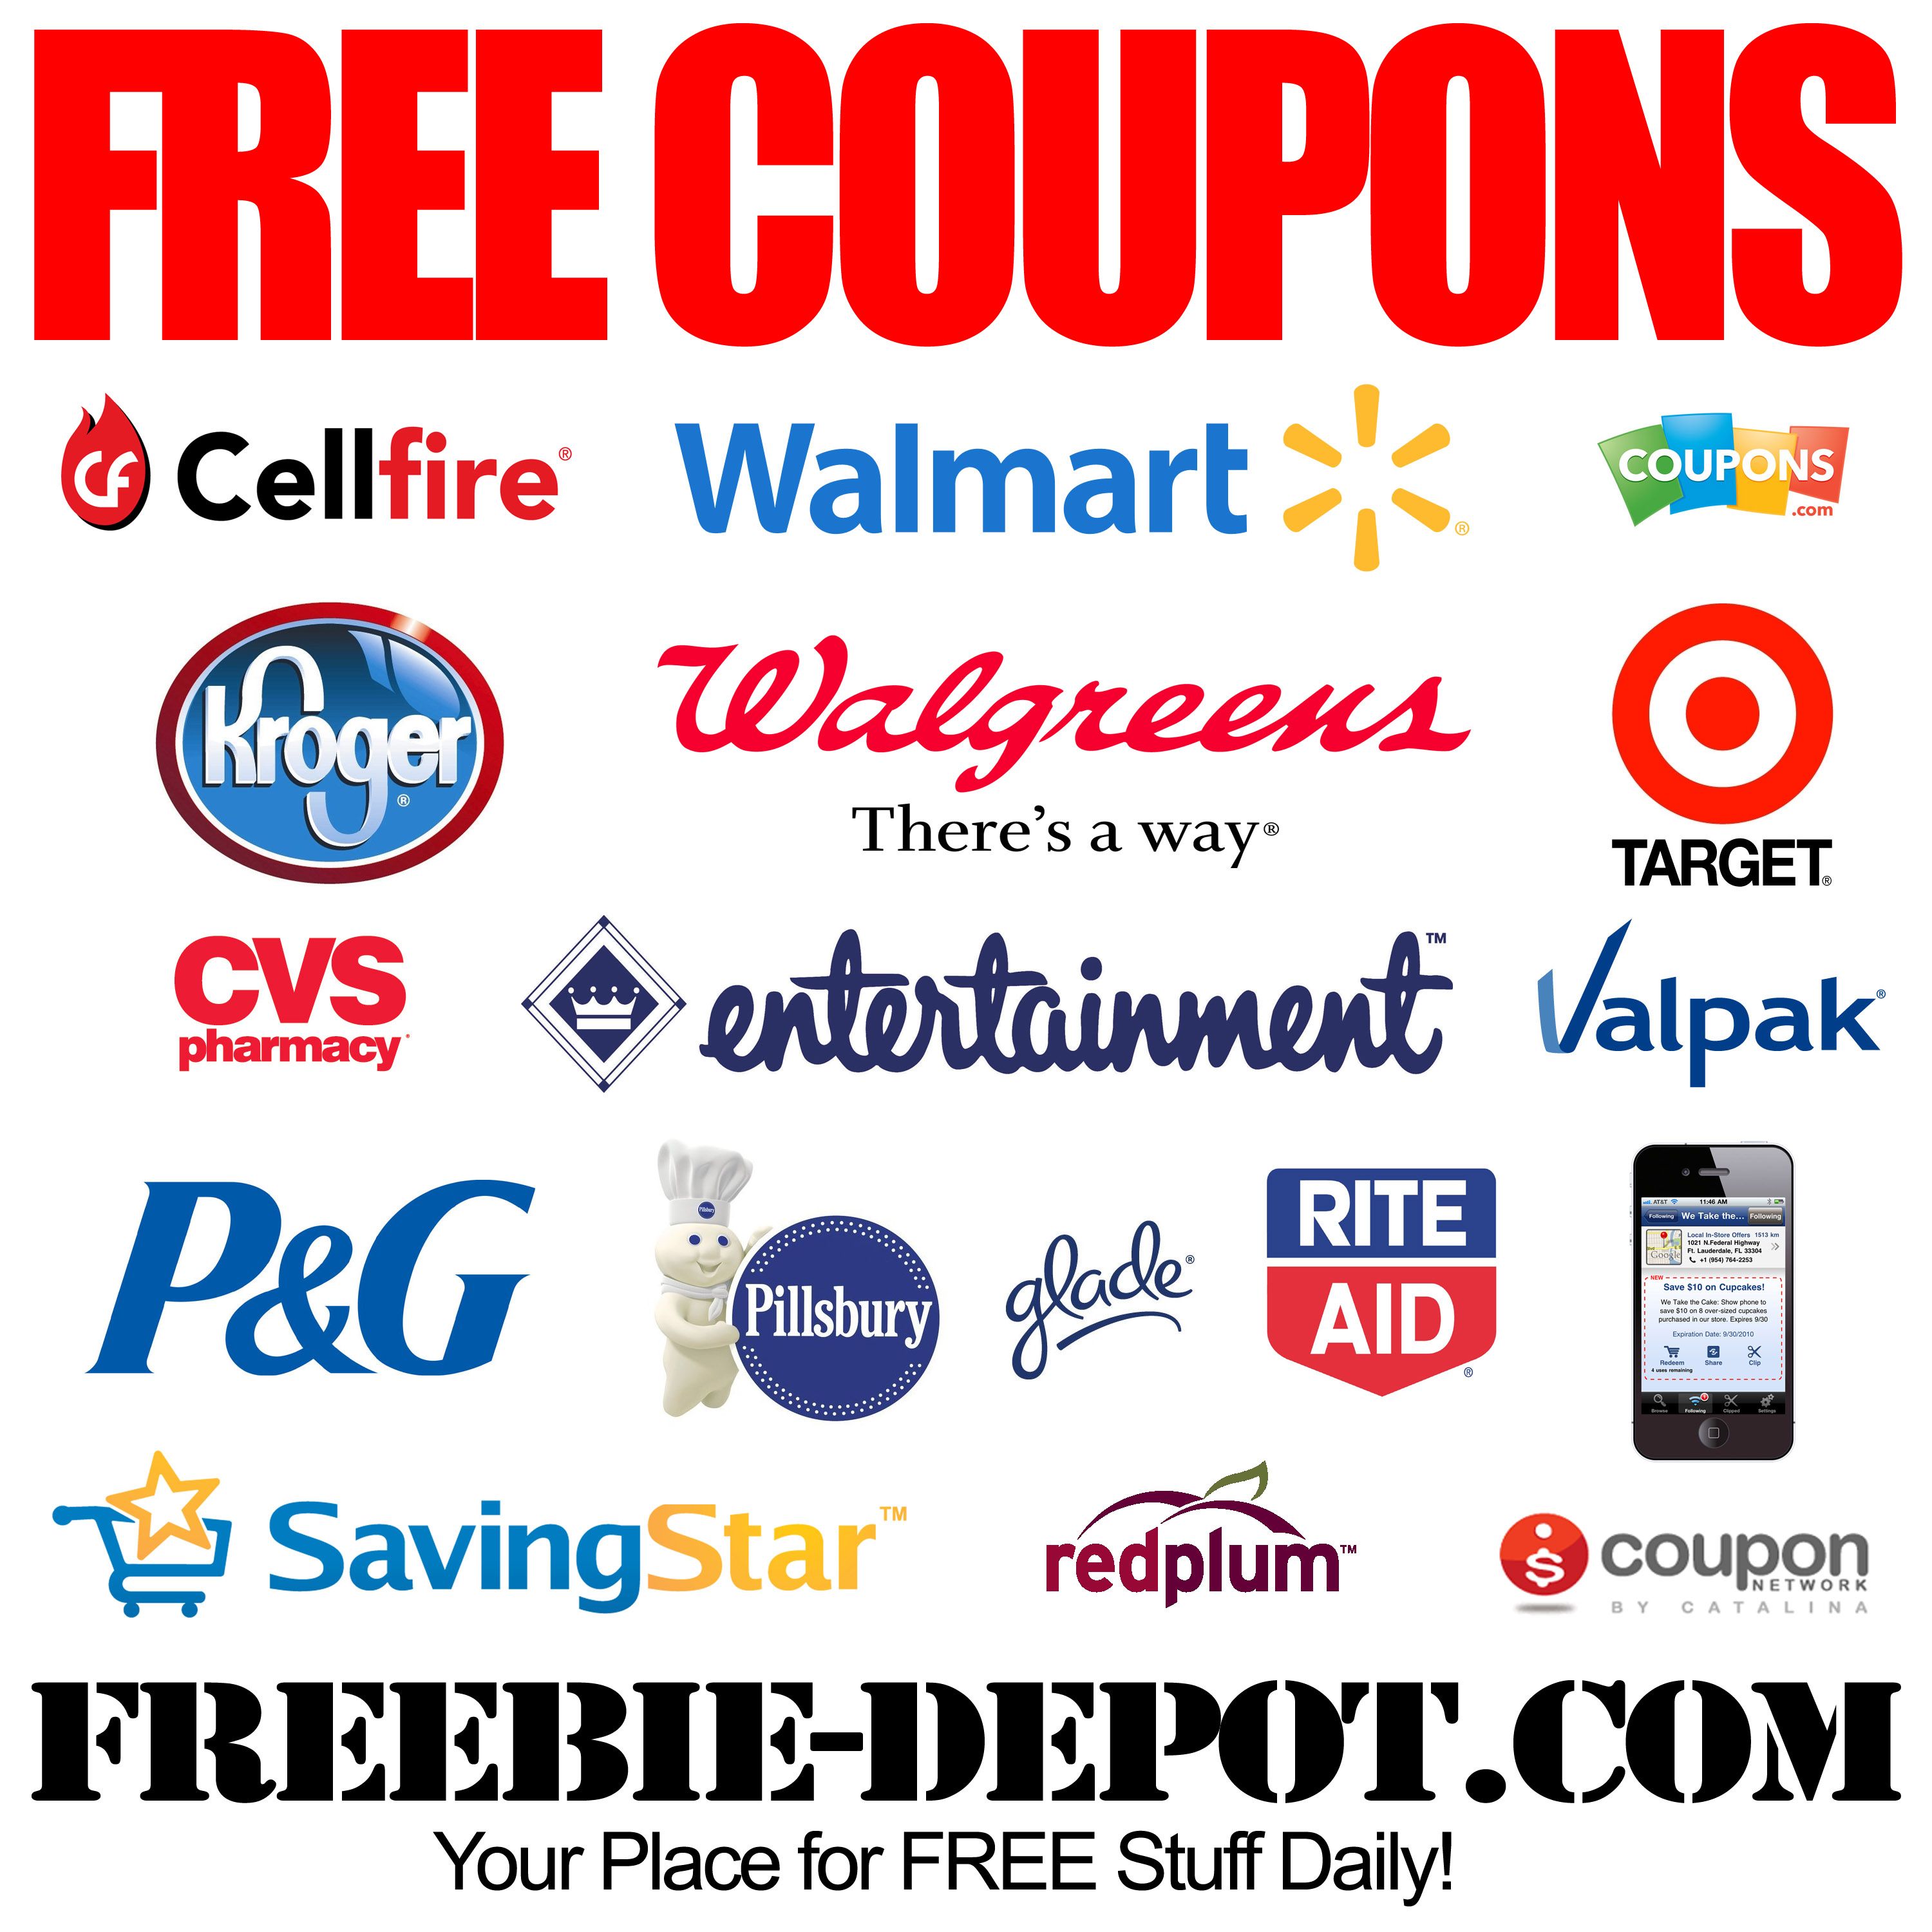 FREE Coupons - FREE Printable Coupons - FREE Grocery Coupons ...